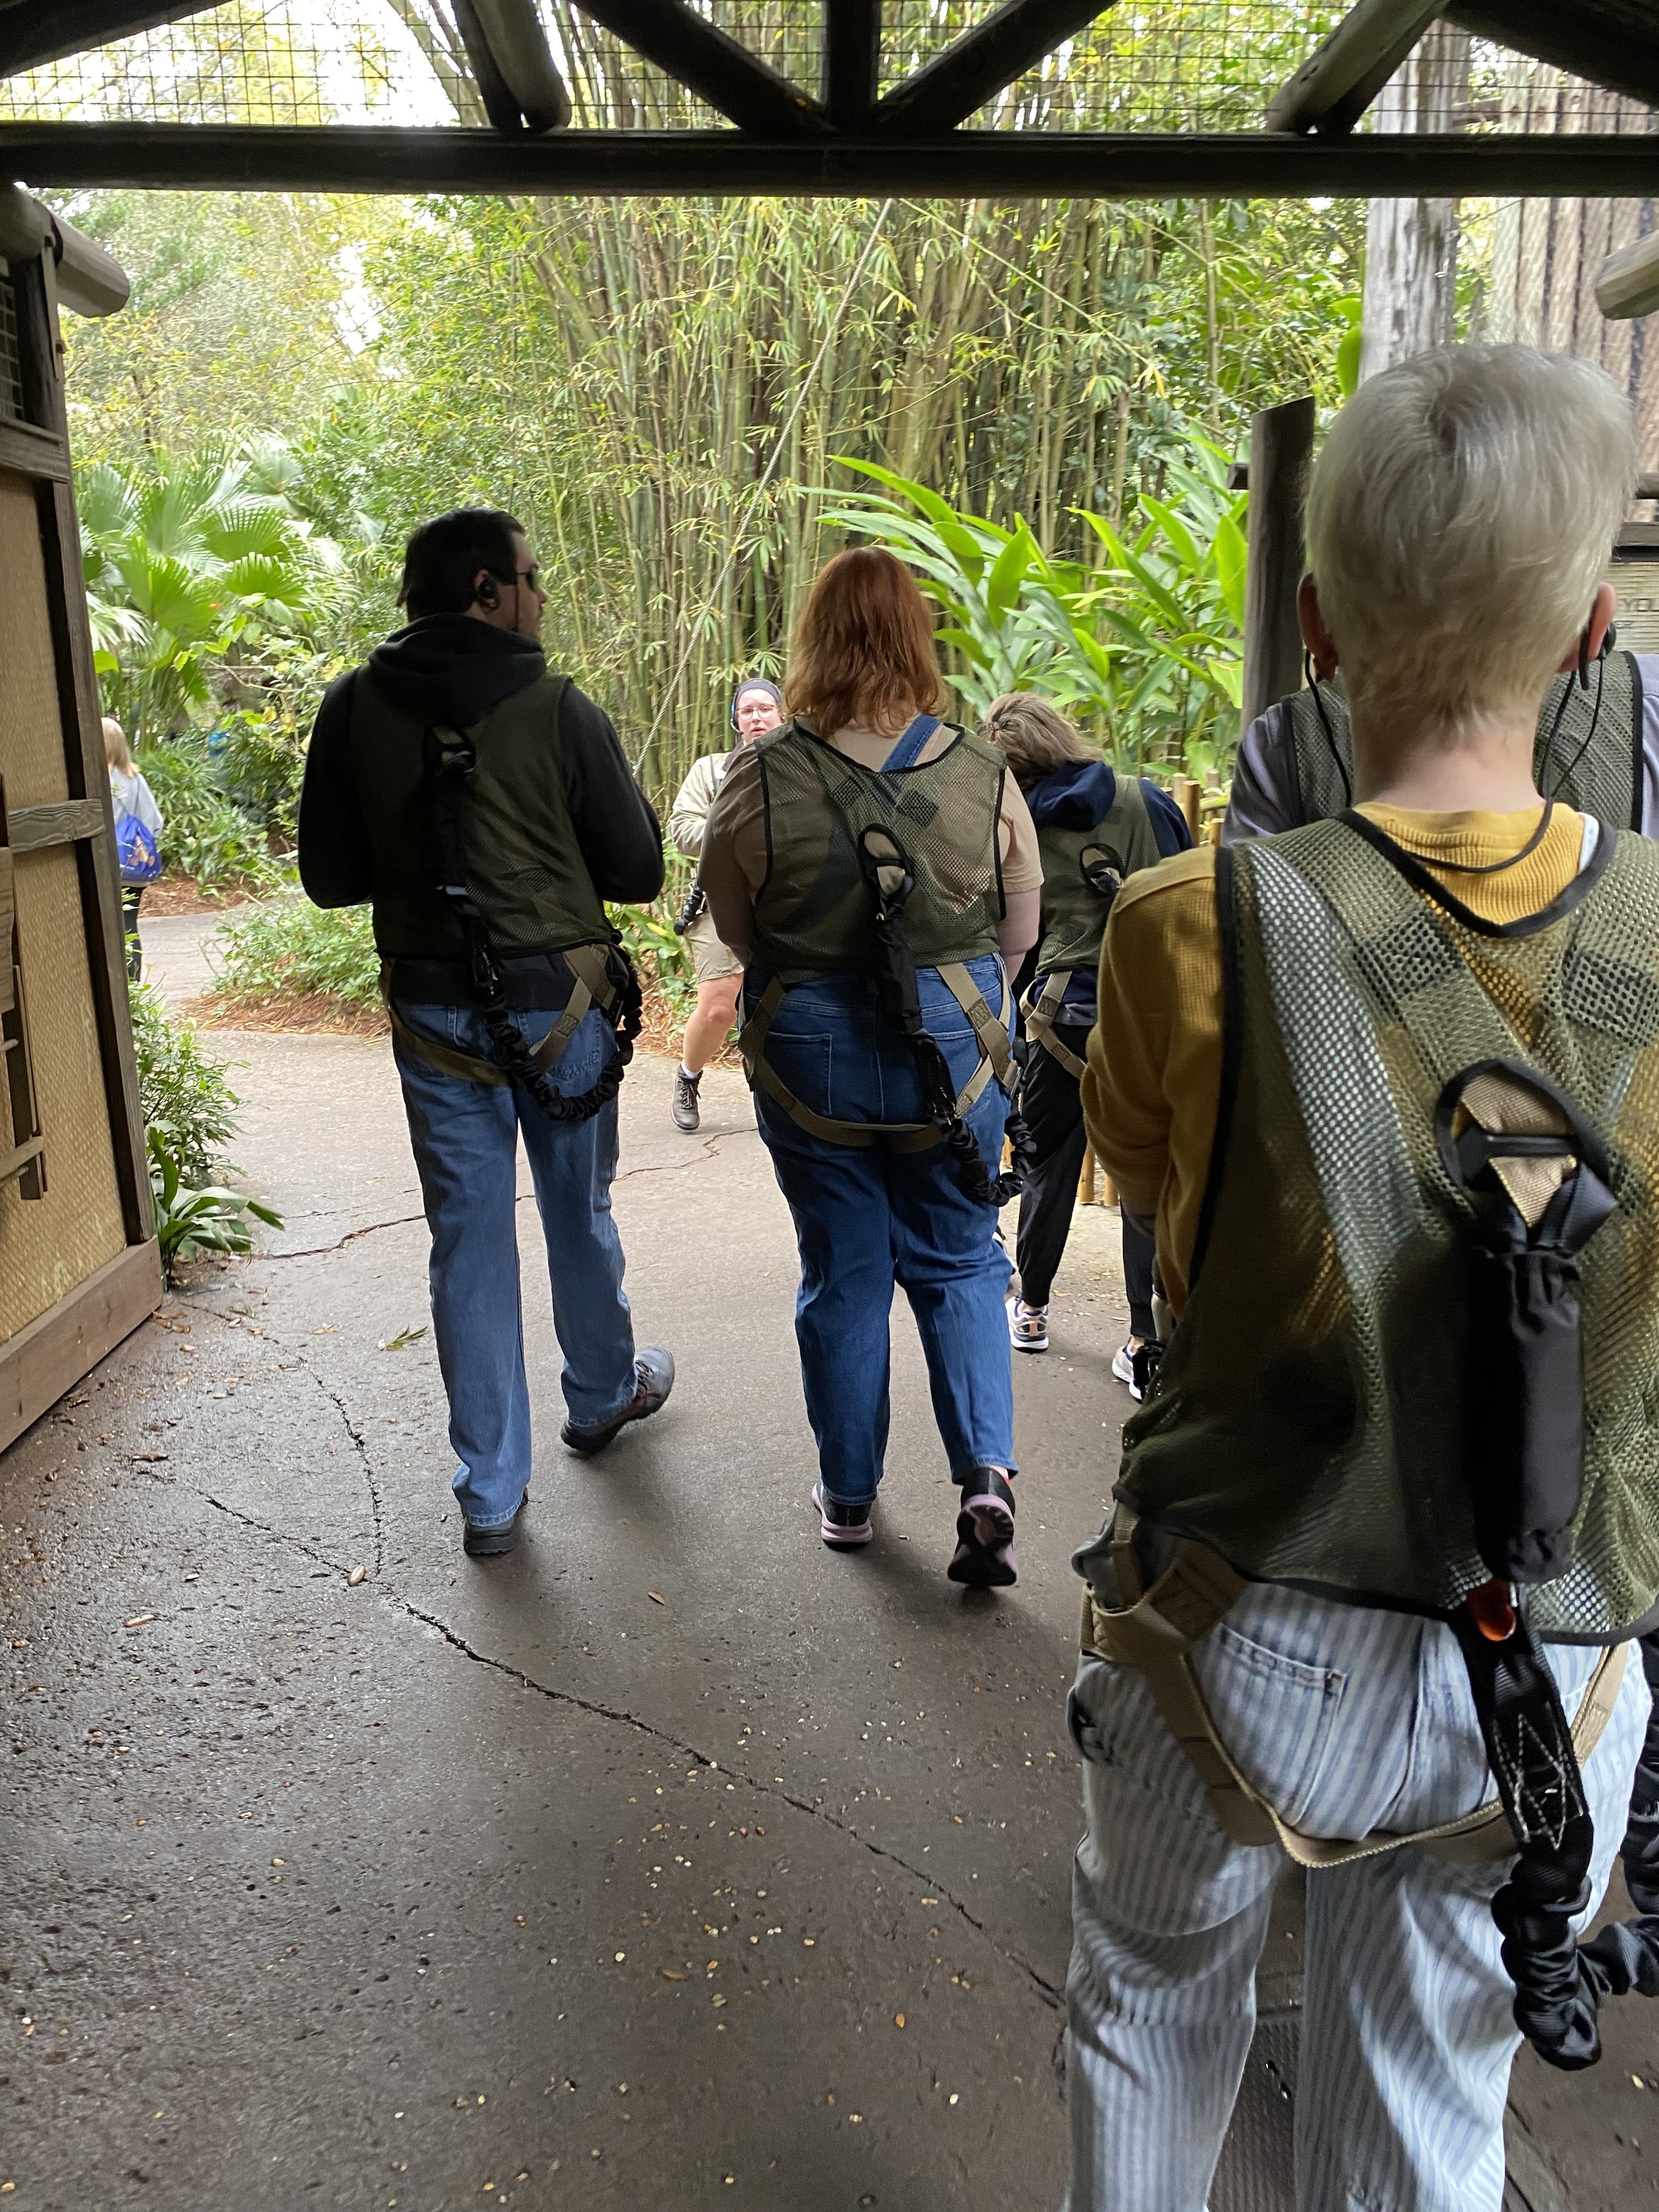  After a safety briefing, we were off right away, starting with the Gorilla Falls Expedition Trail.     There’s a secret entrance on the trail that leads you to the savanna. You would never spot it in a million years!  